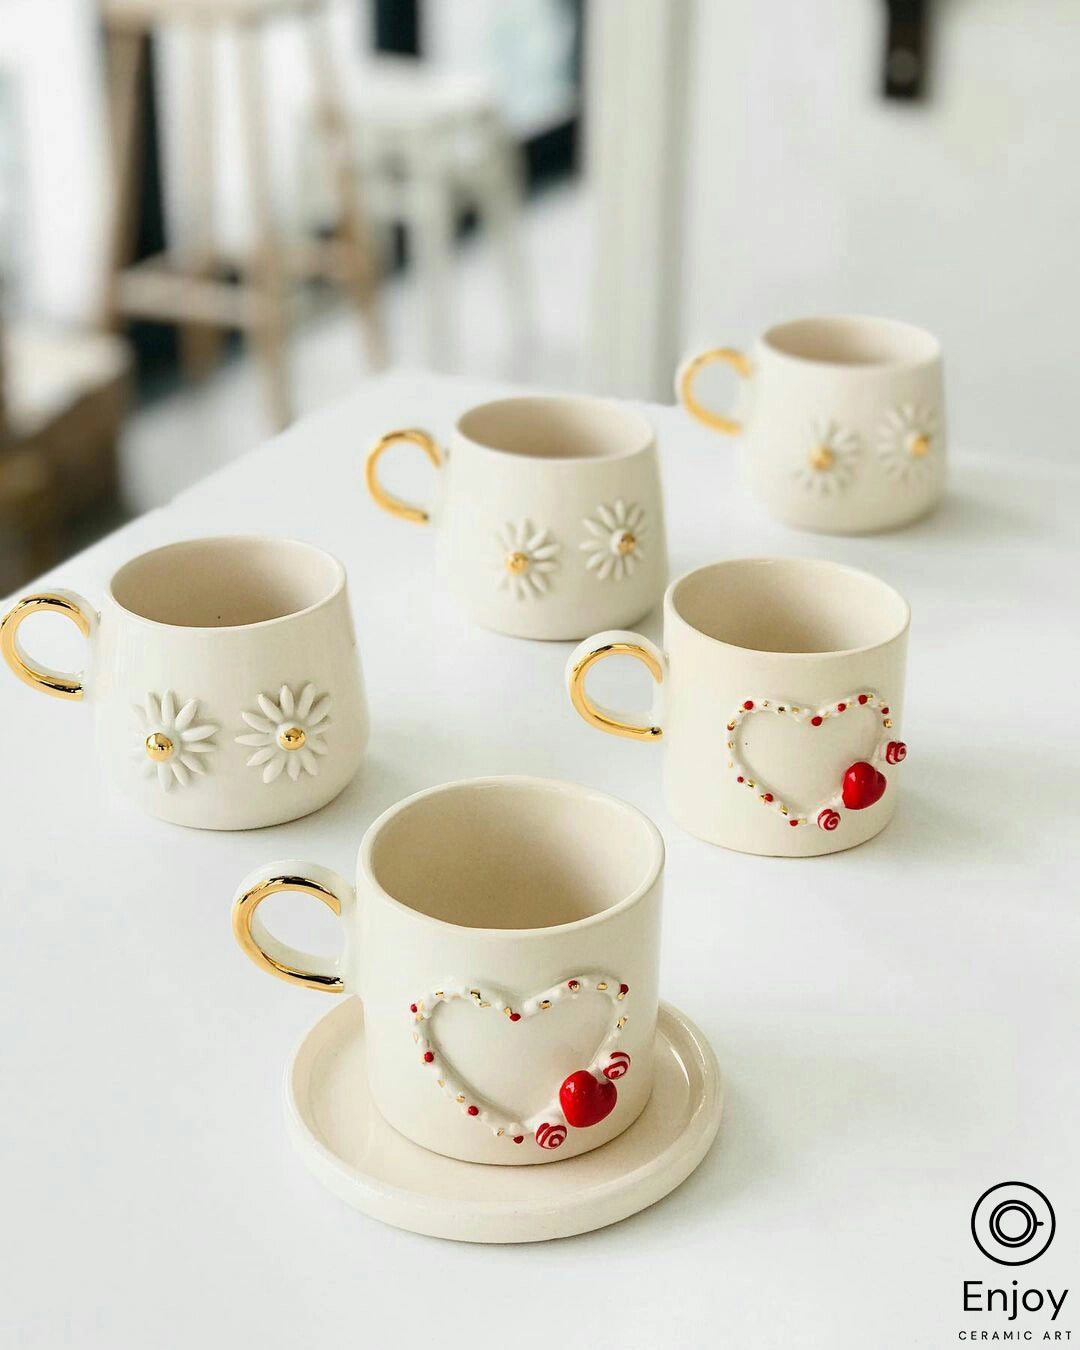 Handcrafted 'Pandora' Heart-Shaped Ceramic Espresso Cup & Saucer Set - 5.4oz Espresso Mugs with Gold Handle, Perfect Valentine's Day Gift